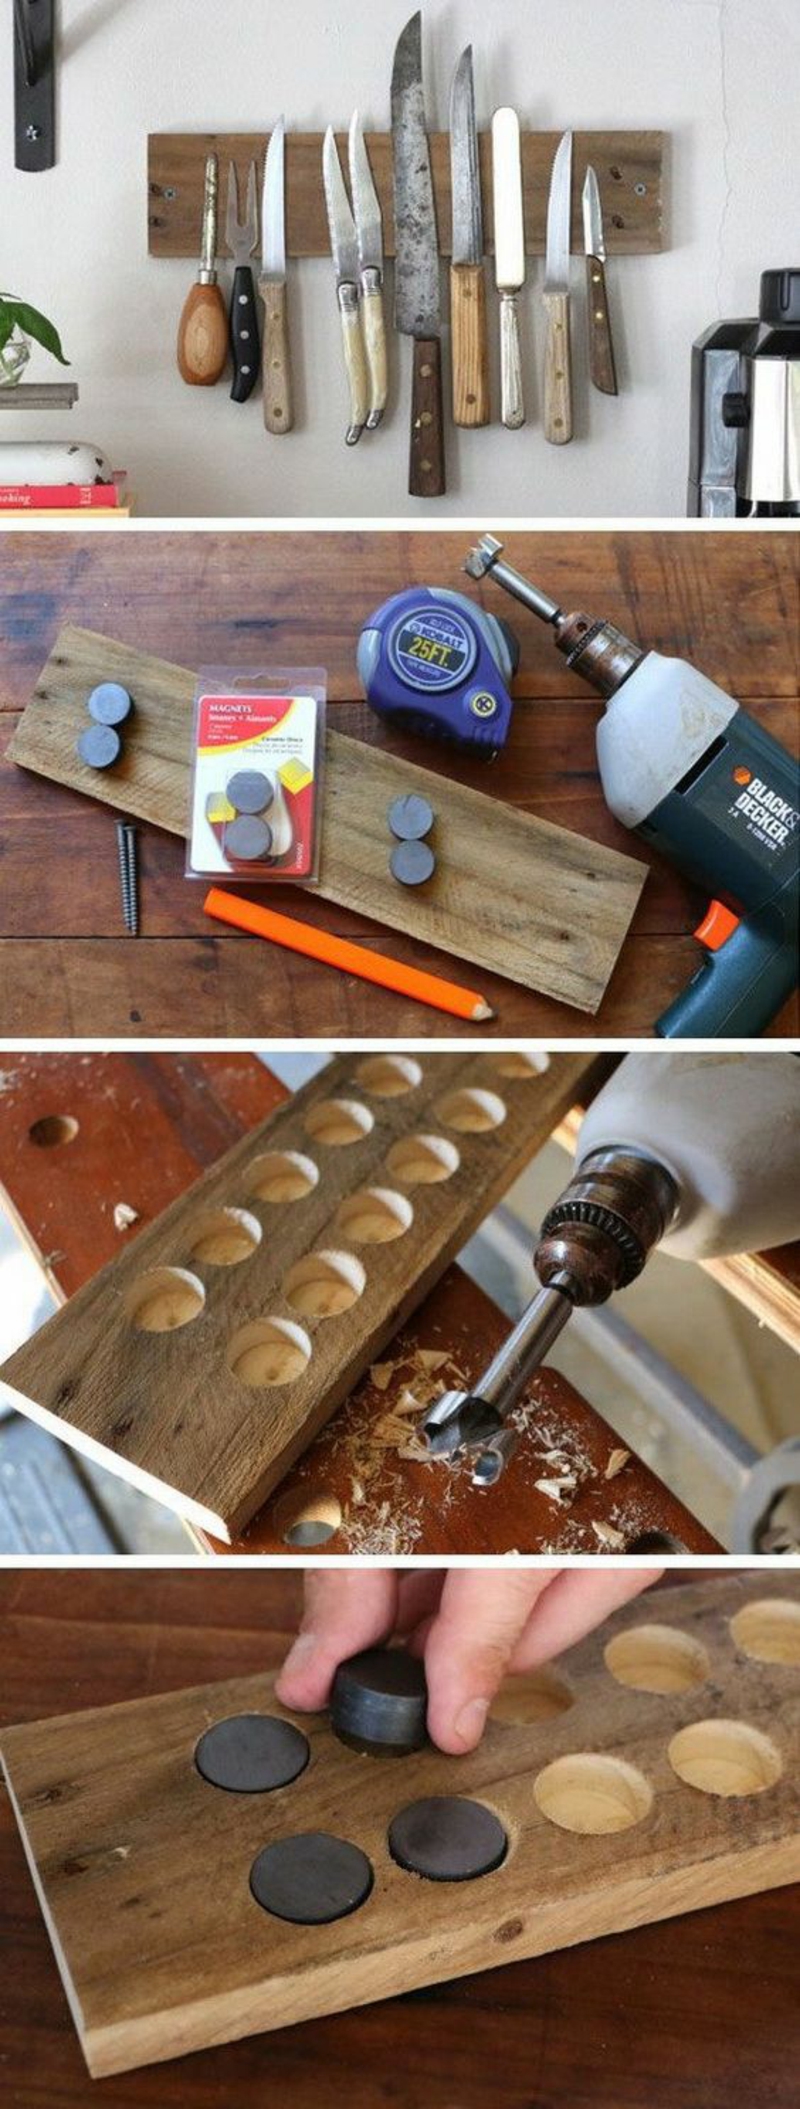 DIY Magnetic Strip for Knife Yourself Build Instructions Kitchen Accessories